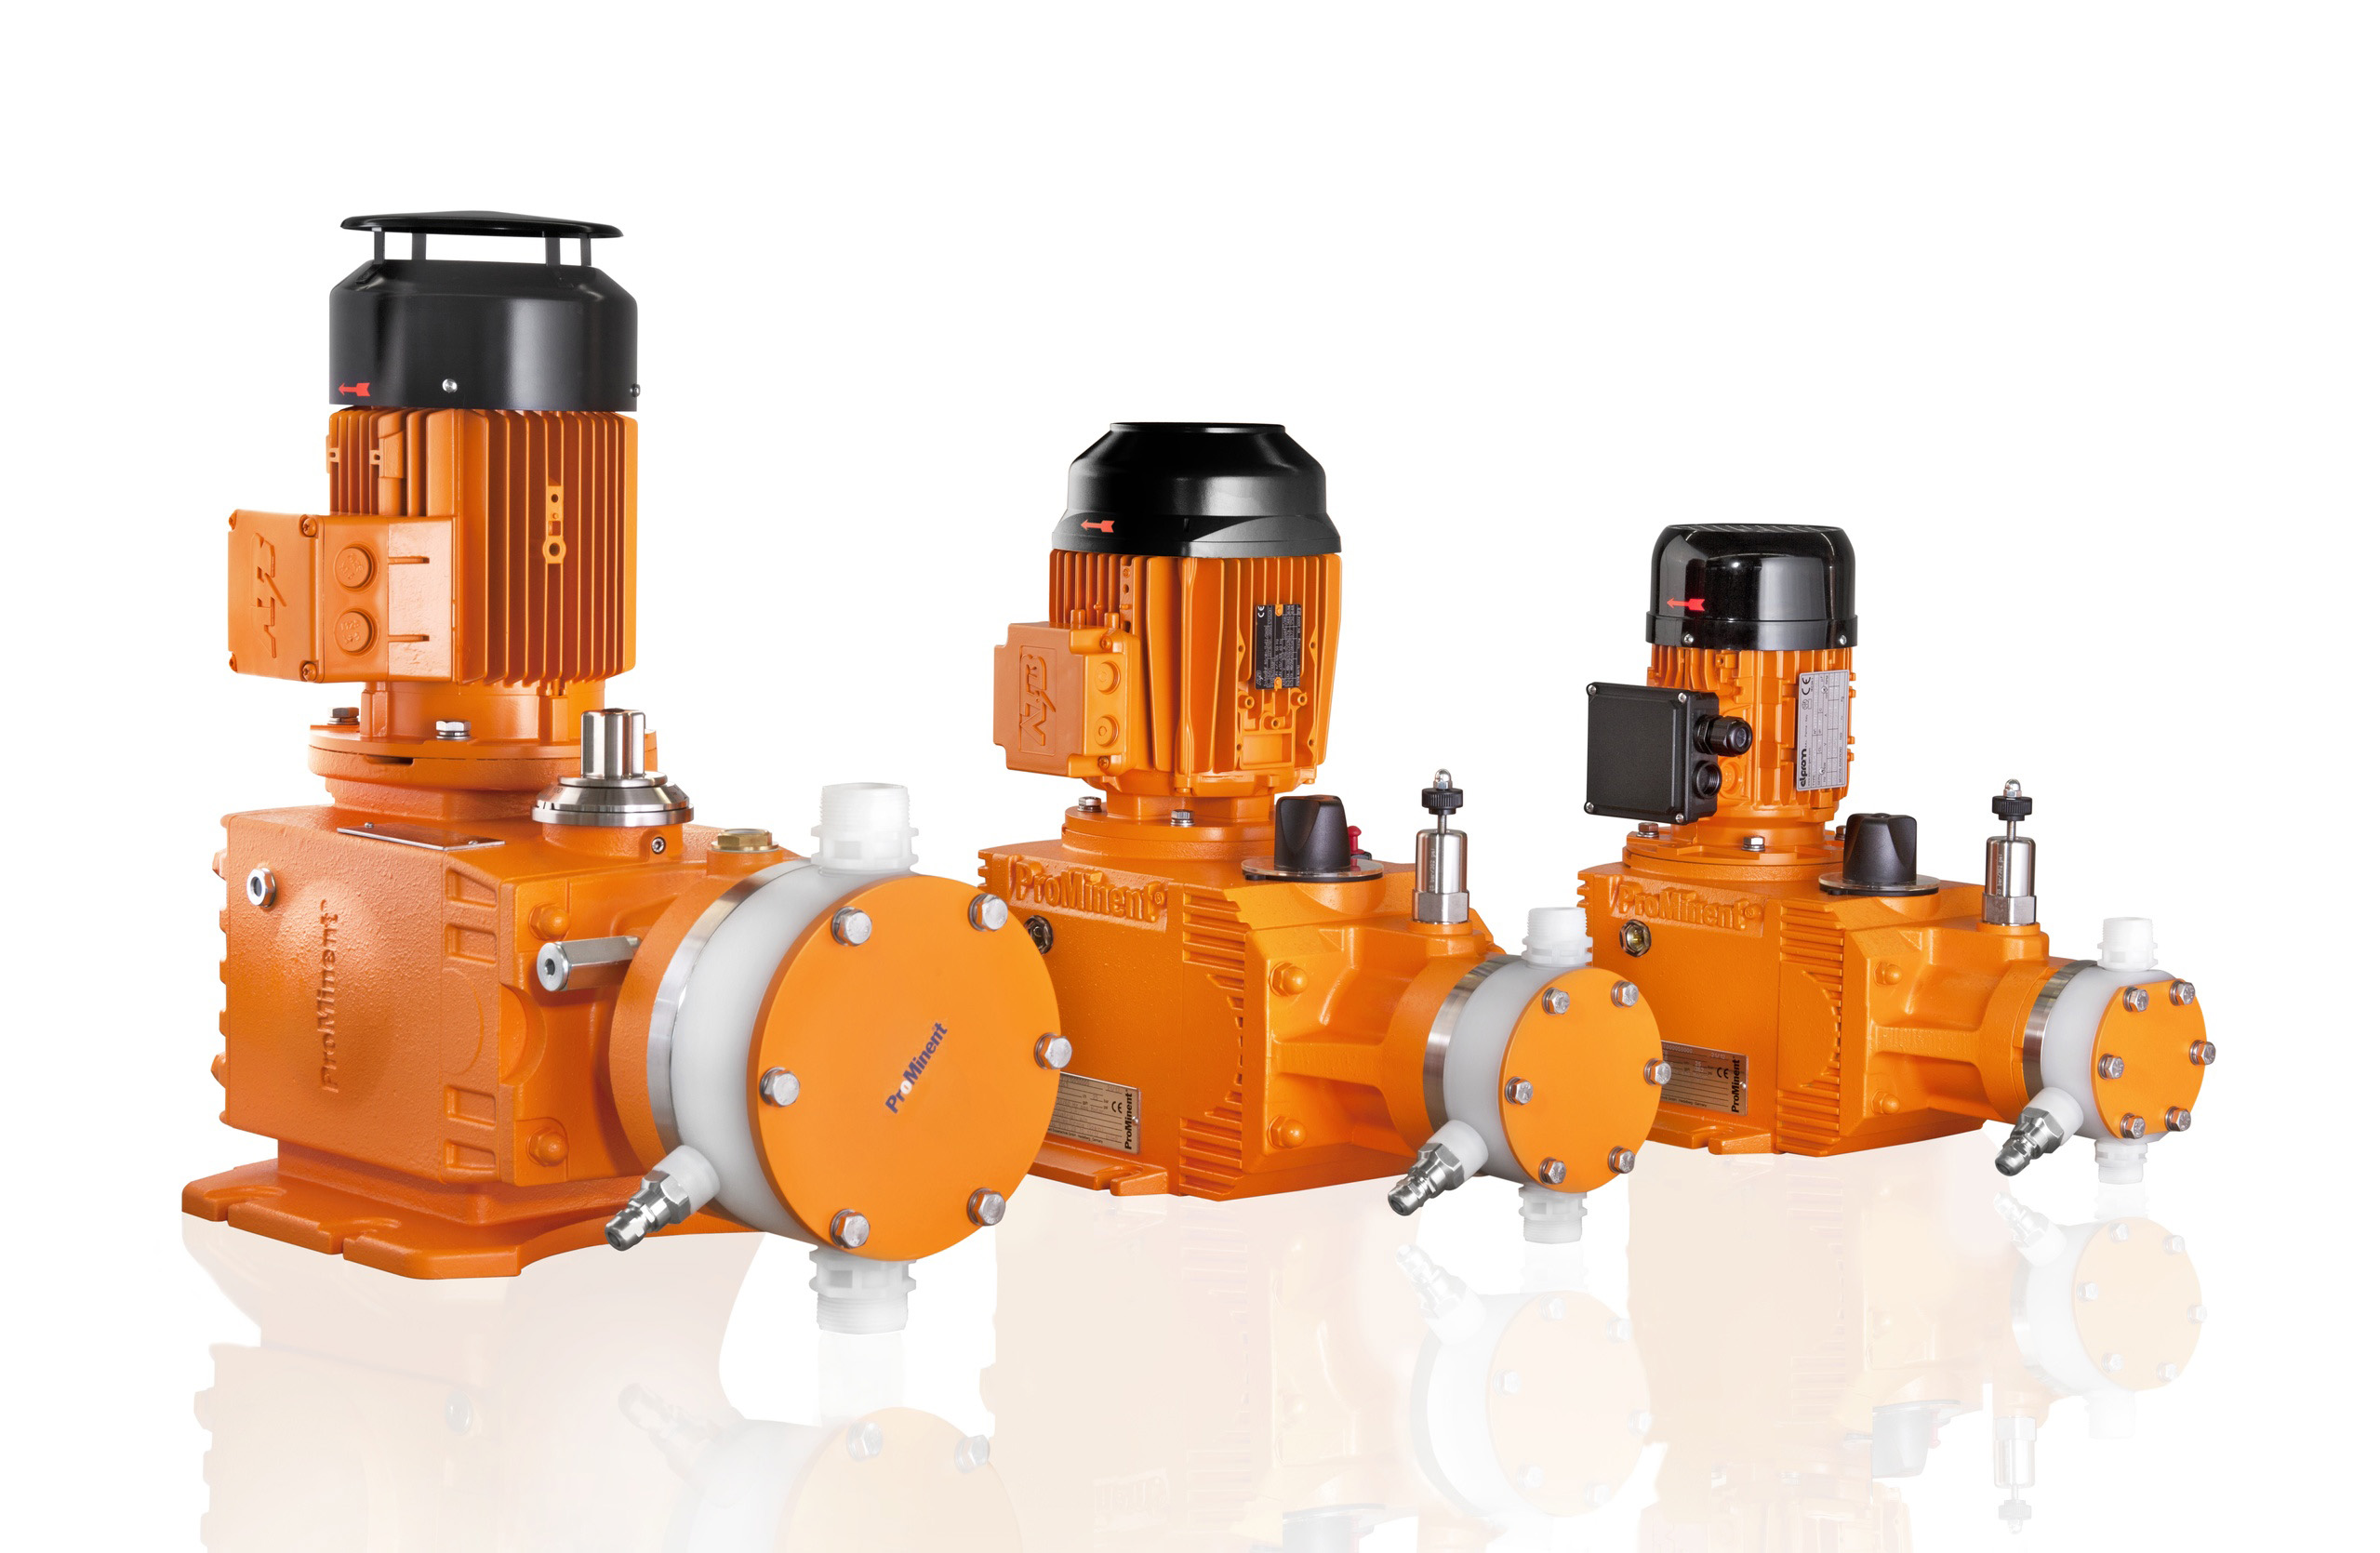 ProMinent’s Hydro hydraulic diaphragm metering pumps offer stroke lengths from 0 to 40 mm.